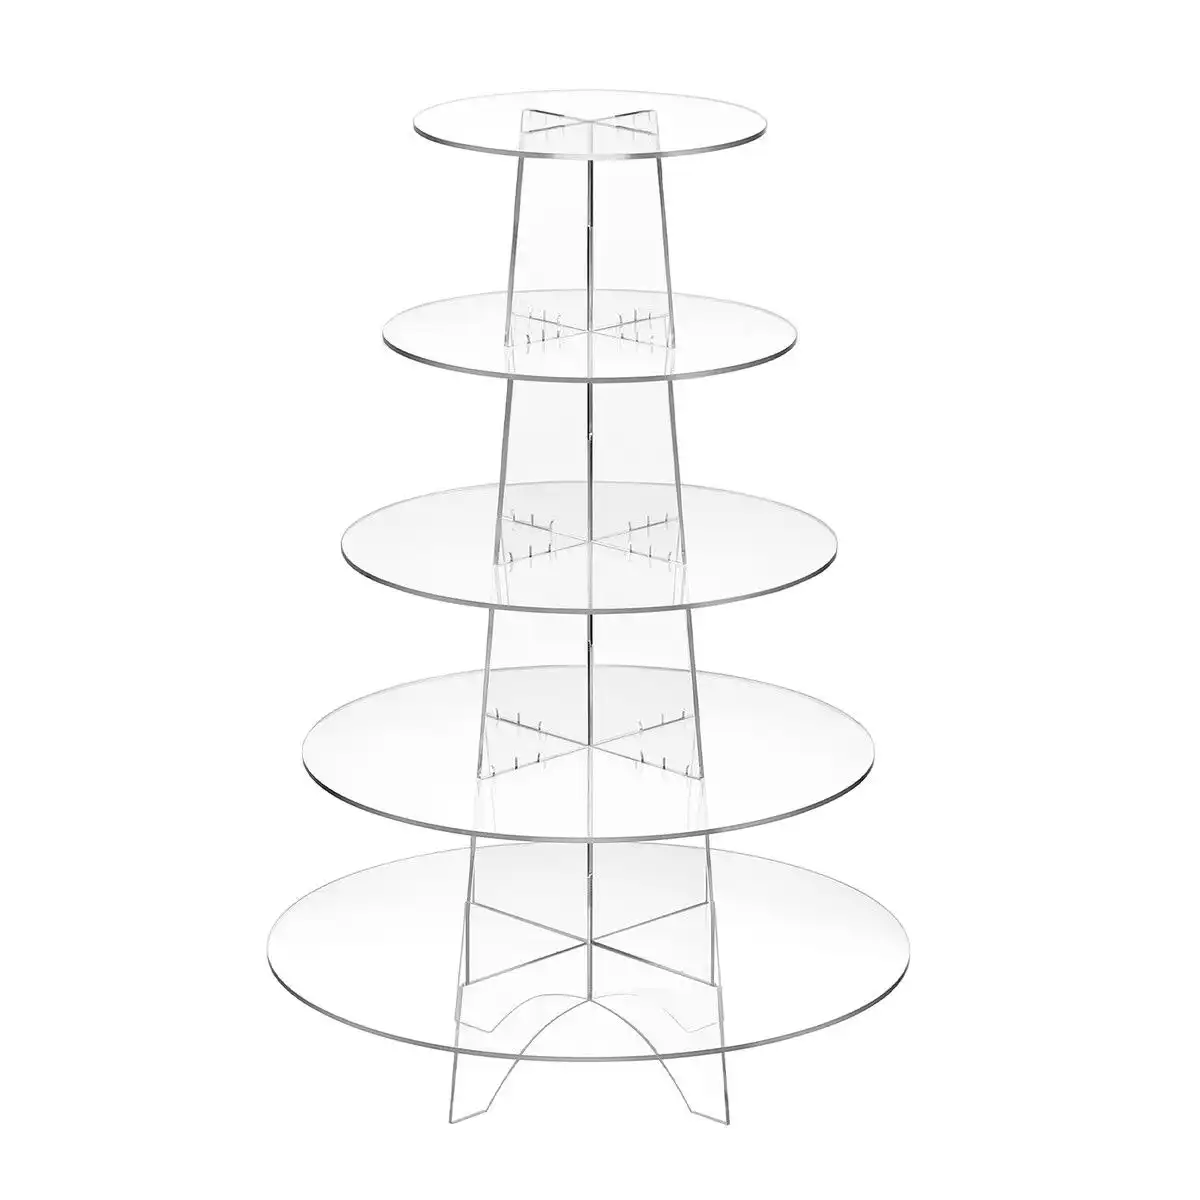 Ausway Acrylic Cupcake Stand 5 Tier Display Shelf Tower Unit Bakery Cake Donut Model Pastry Holder Round Clear for Wedding Party